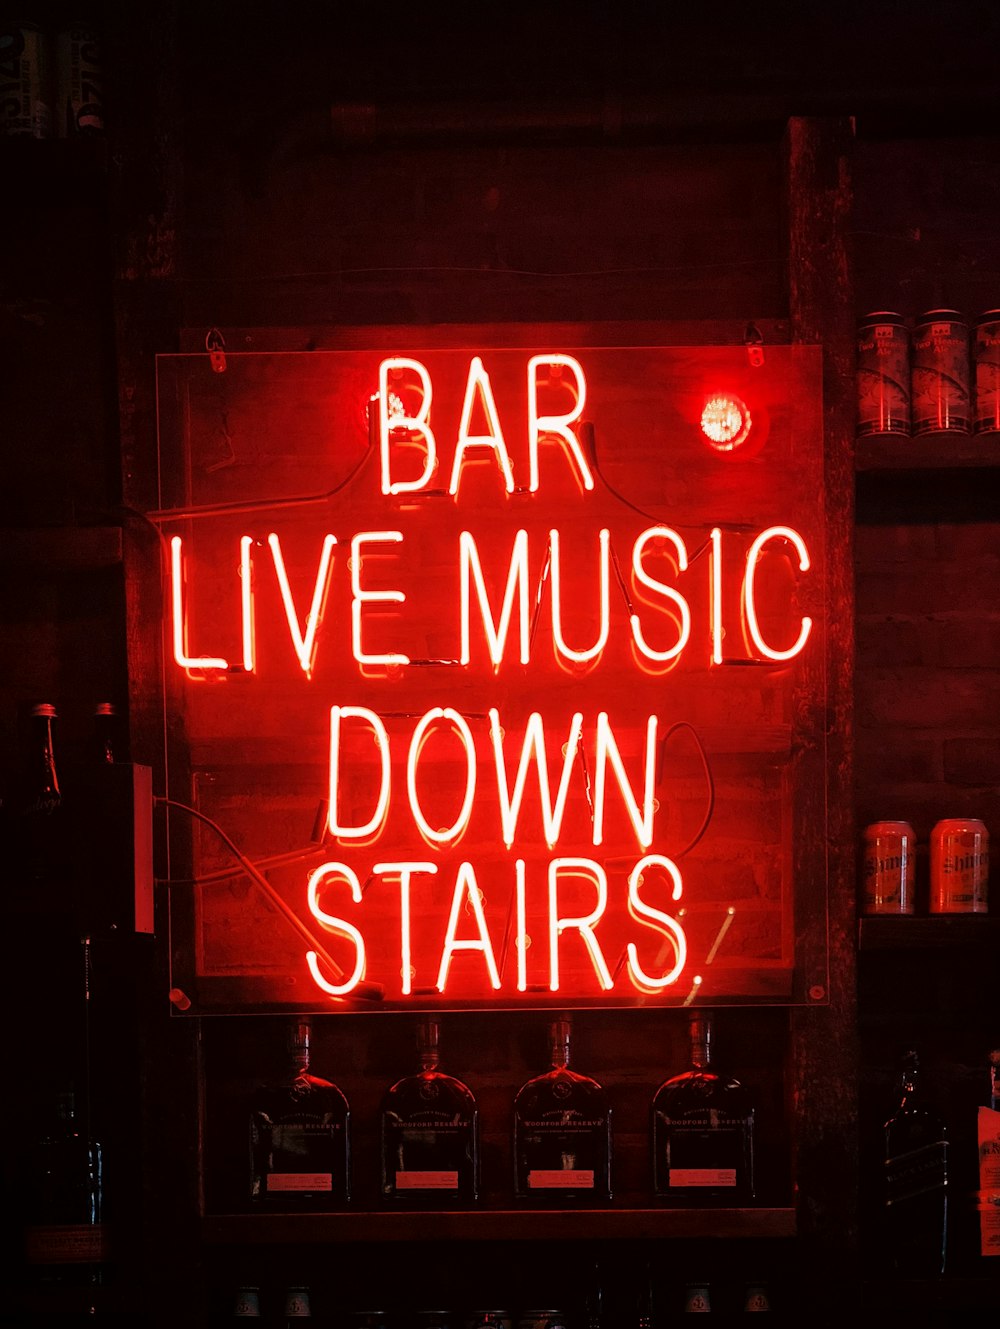 bar live music down stairs neon light signage